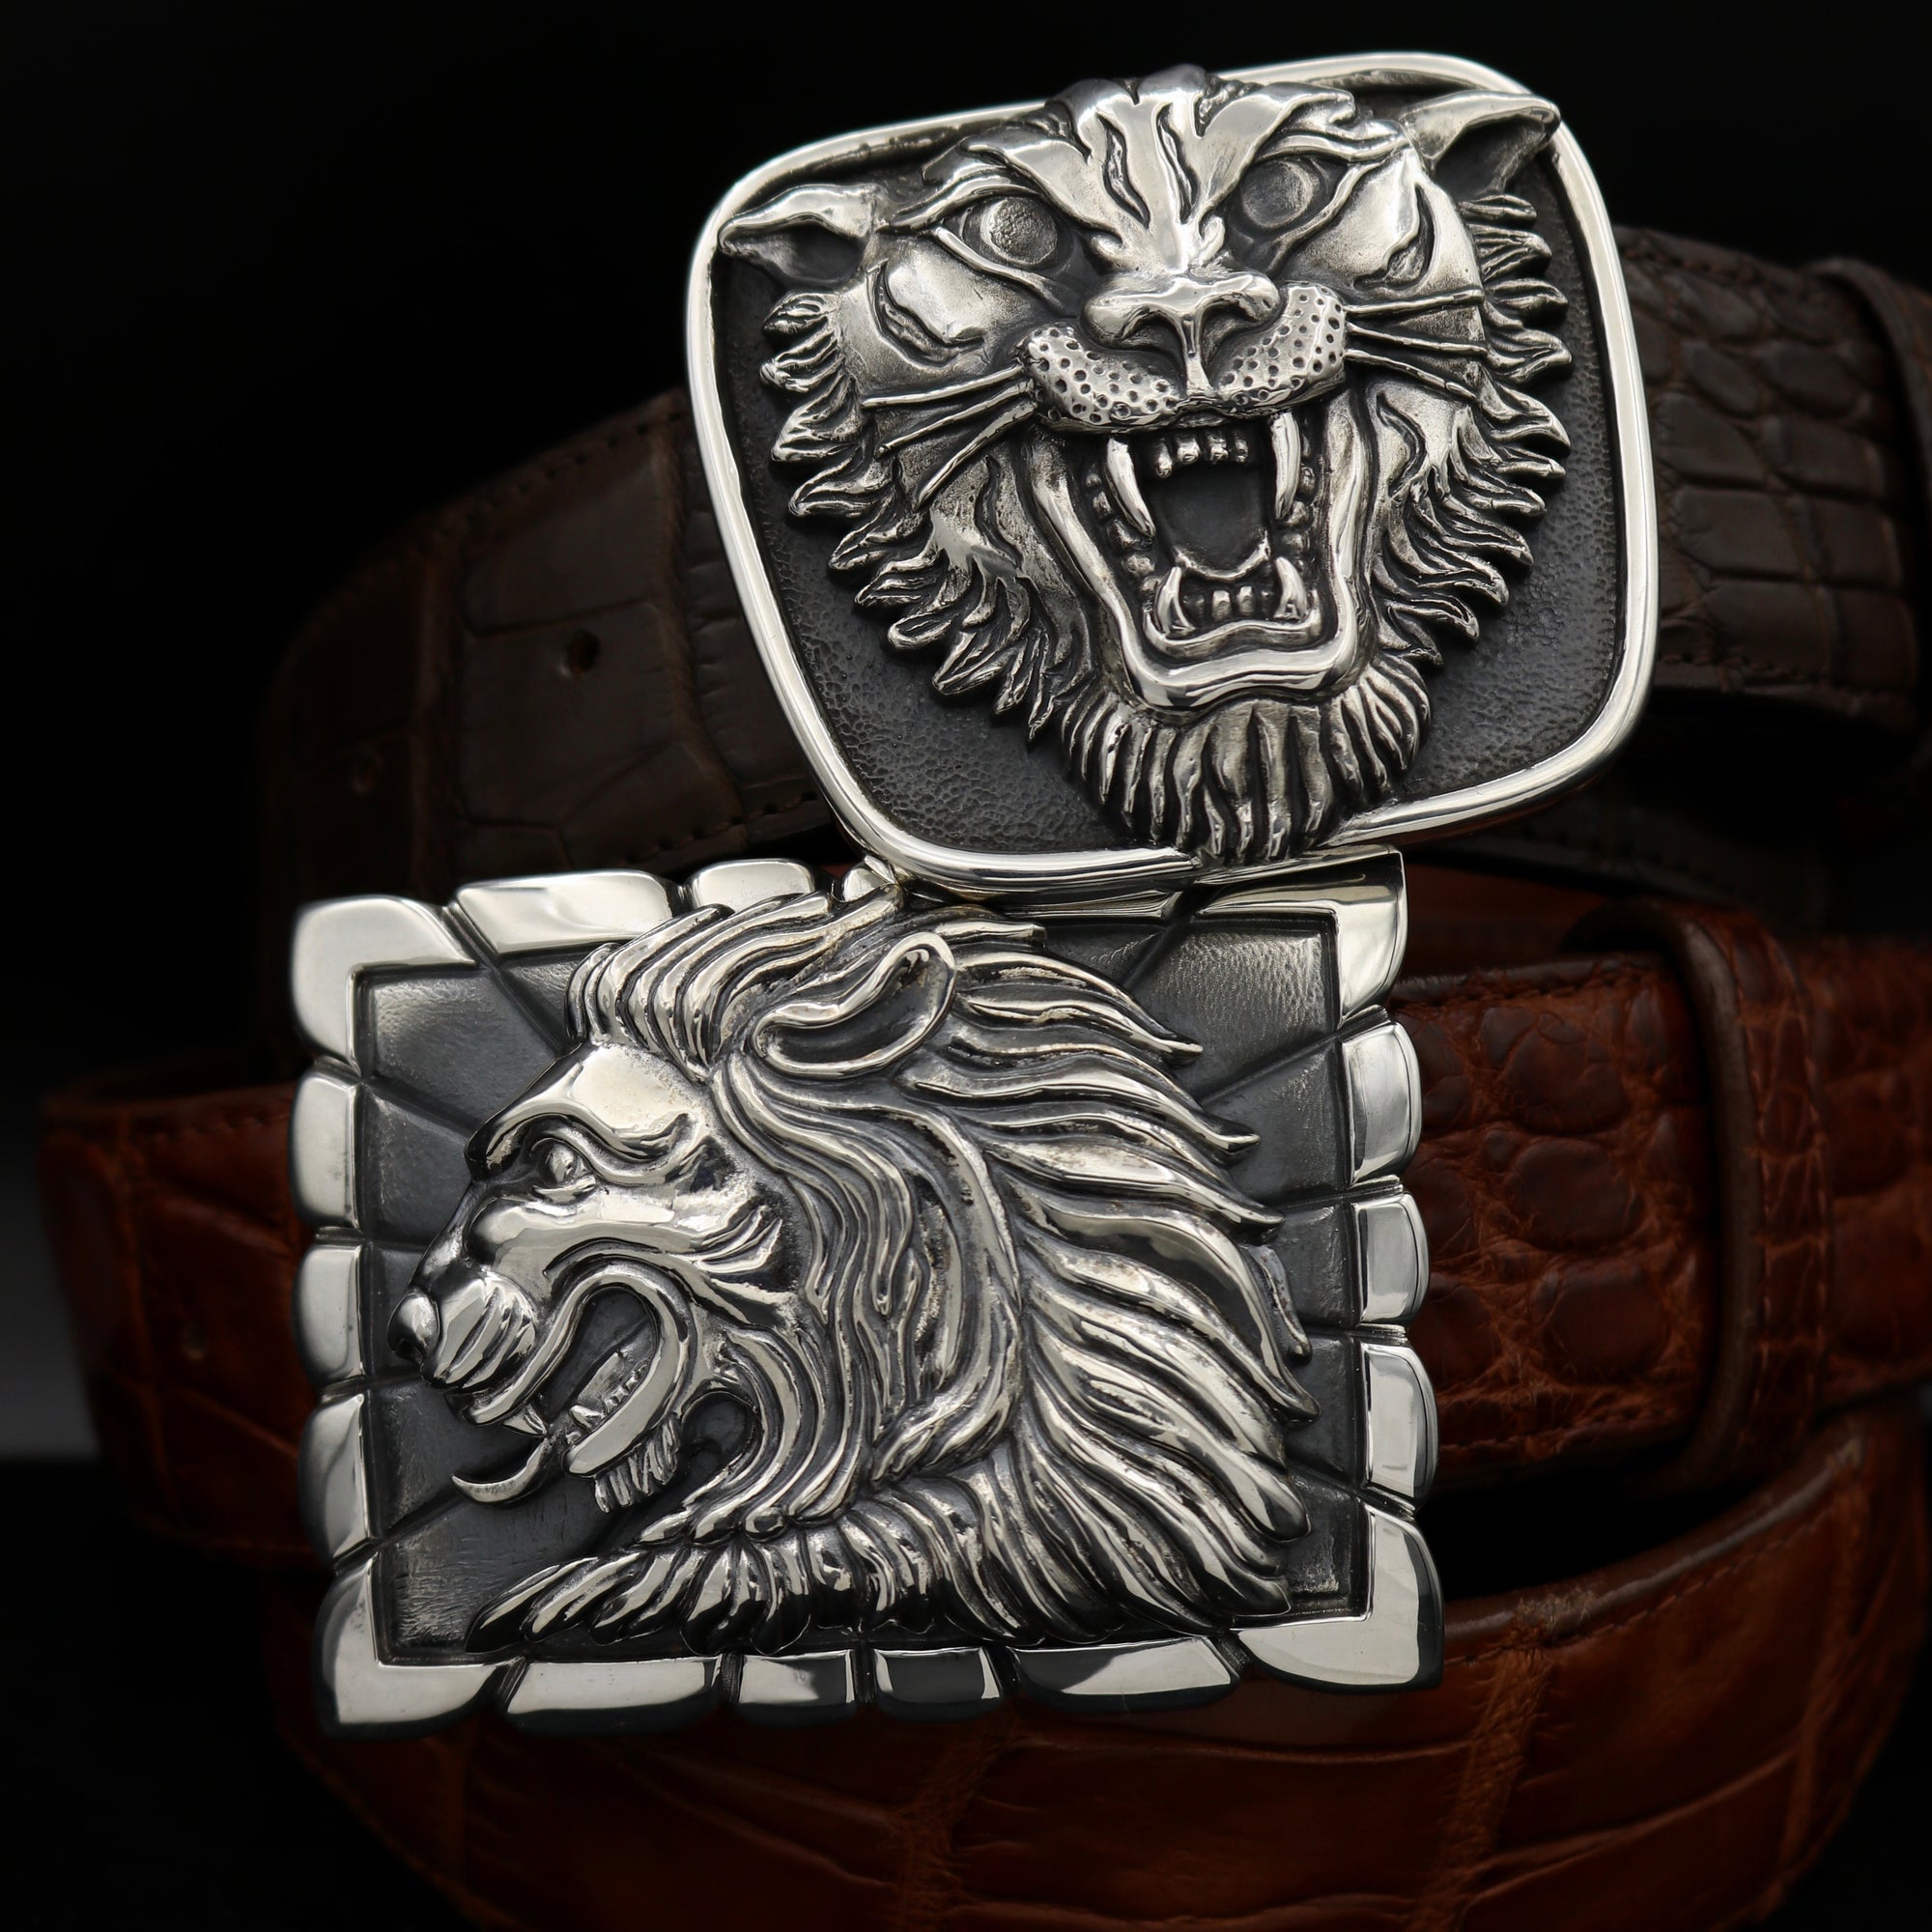 Two Trophy Buckles of Sterling Silver for men or women. Top, The Medium Tiger Head buckle and below the Lion Head in Profile buckle.